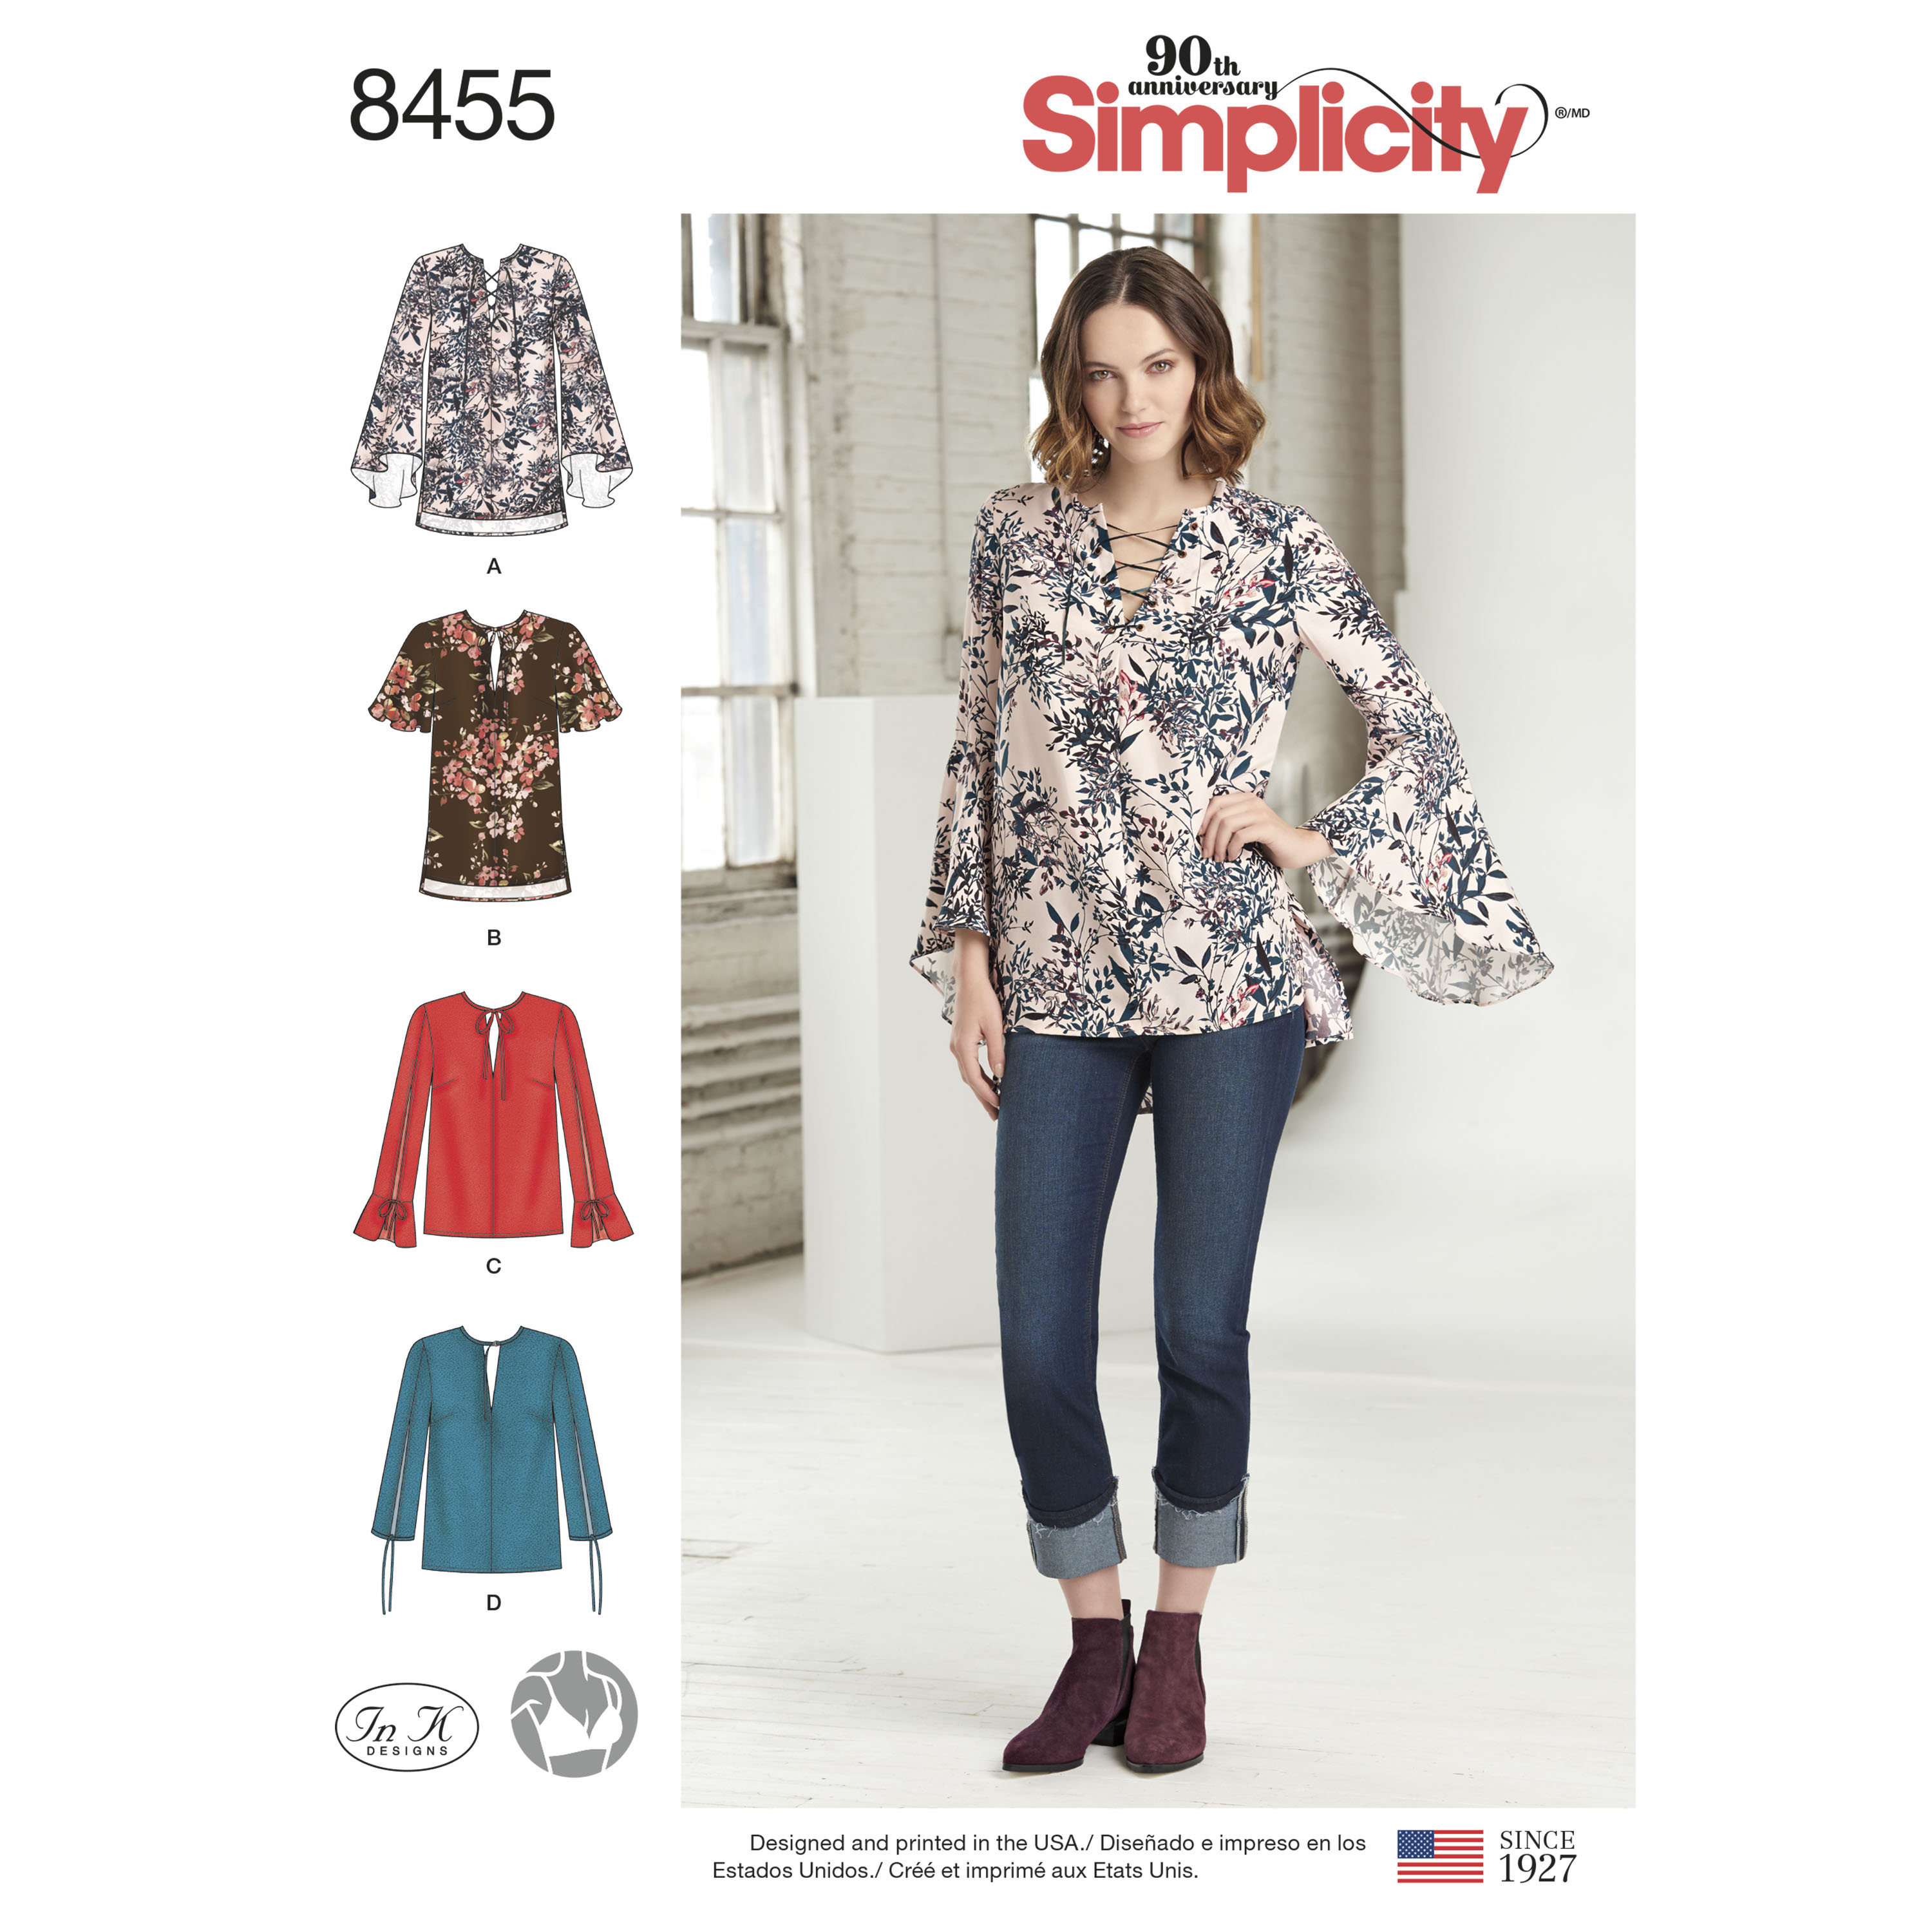 https://images.patternreview.com/sewing/patterns/simplicity/2017/8455/8455.jpg